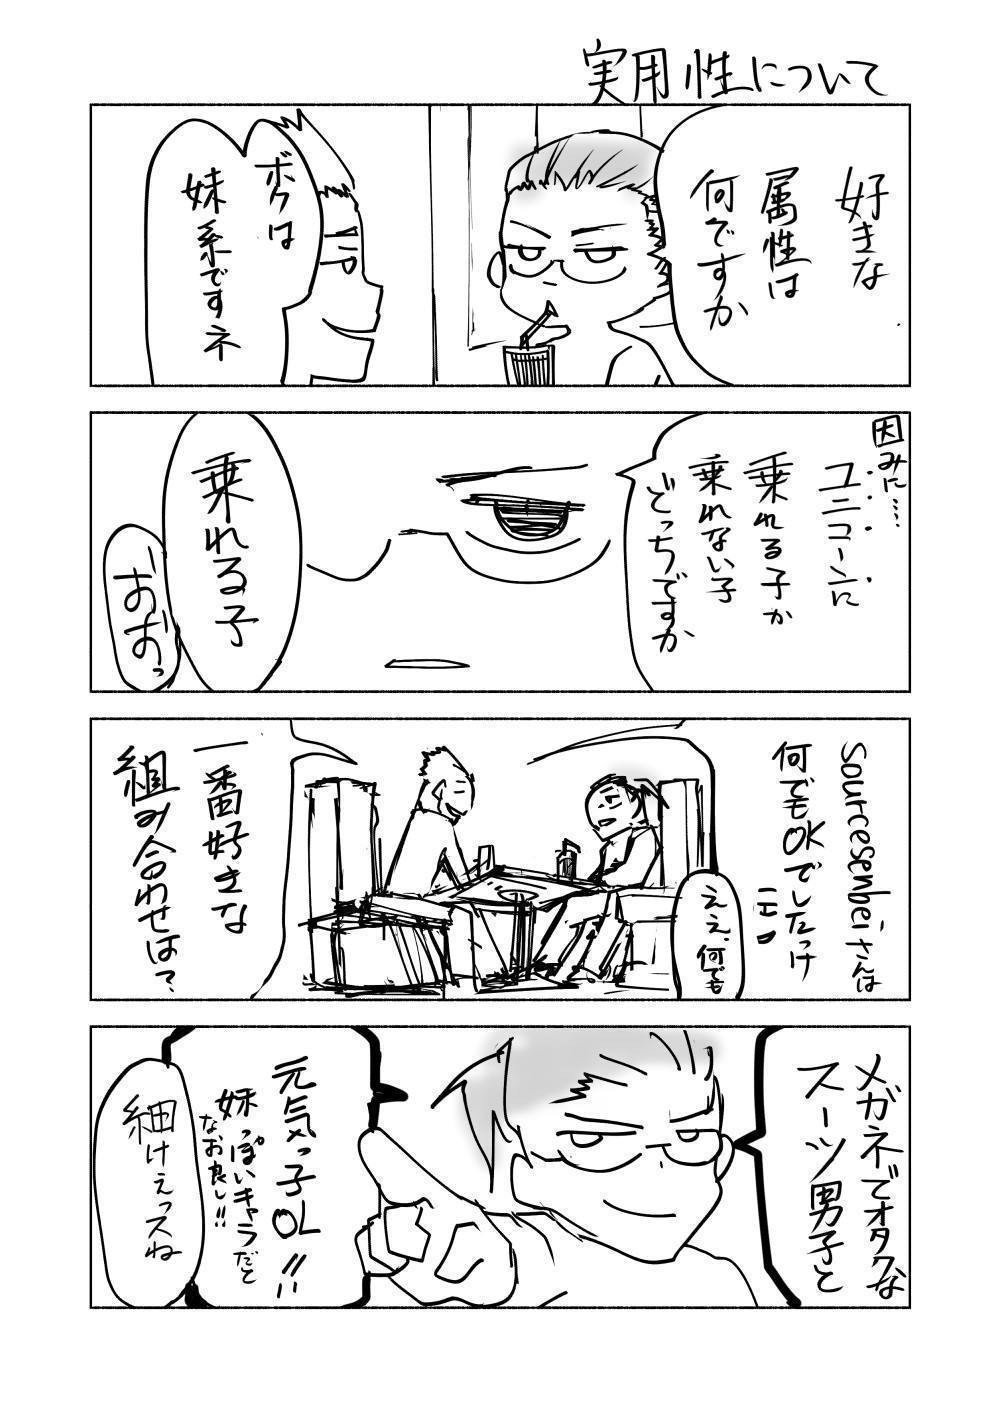 sourcesebei漫画